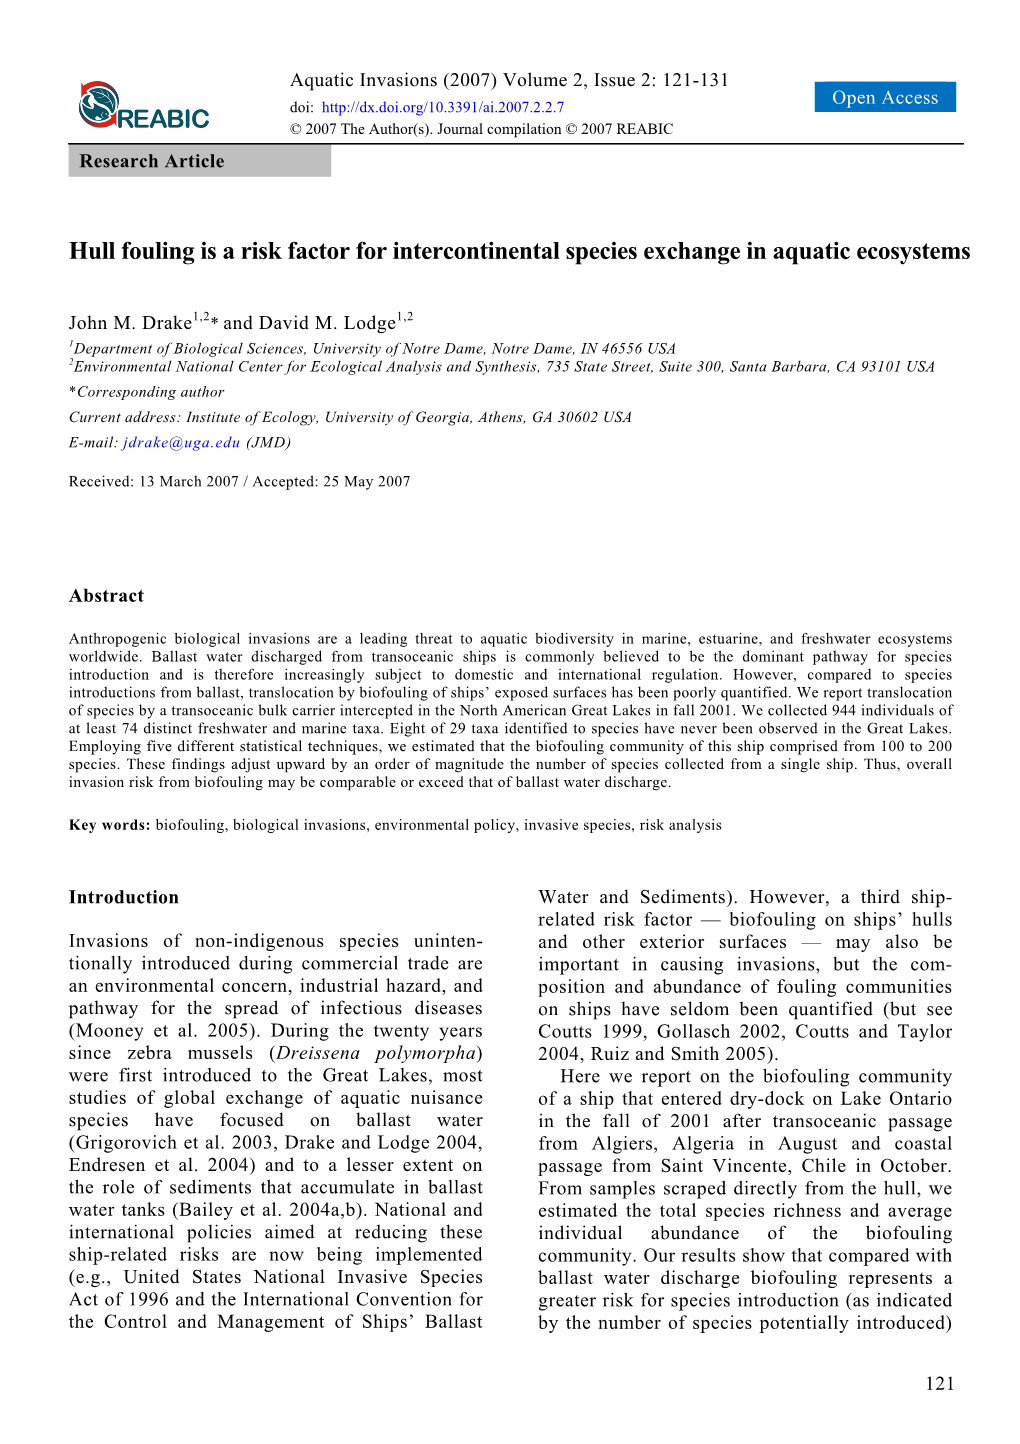 Hull Fouling Is a Risk Factor for Intercontinental Species Exchange in Aquatic Ecosystems